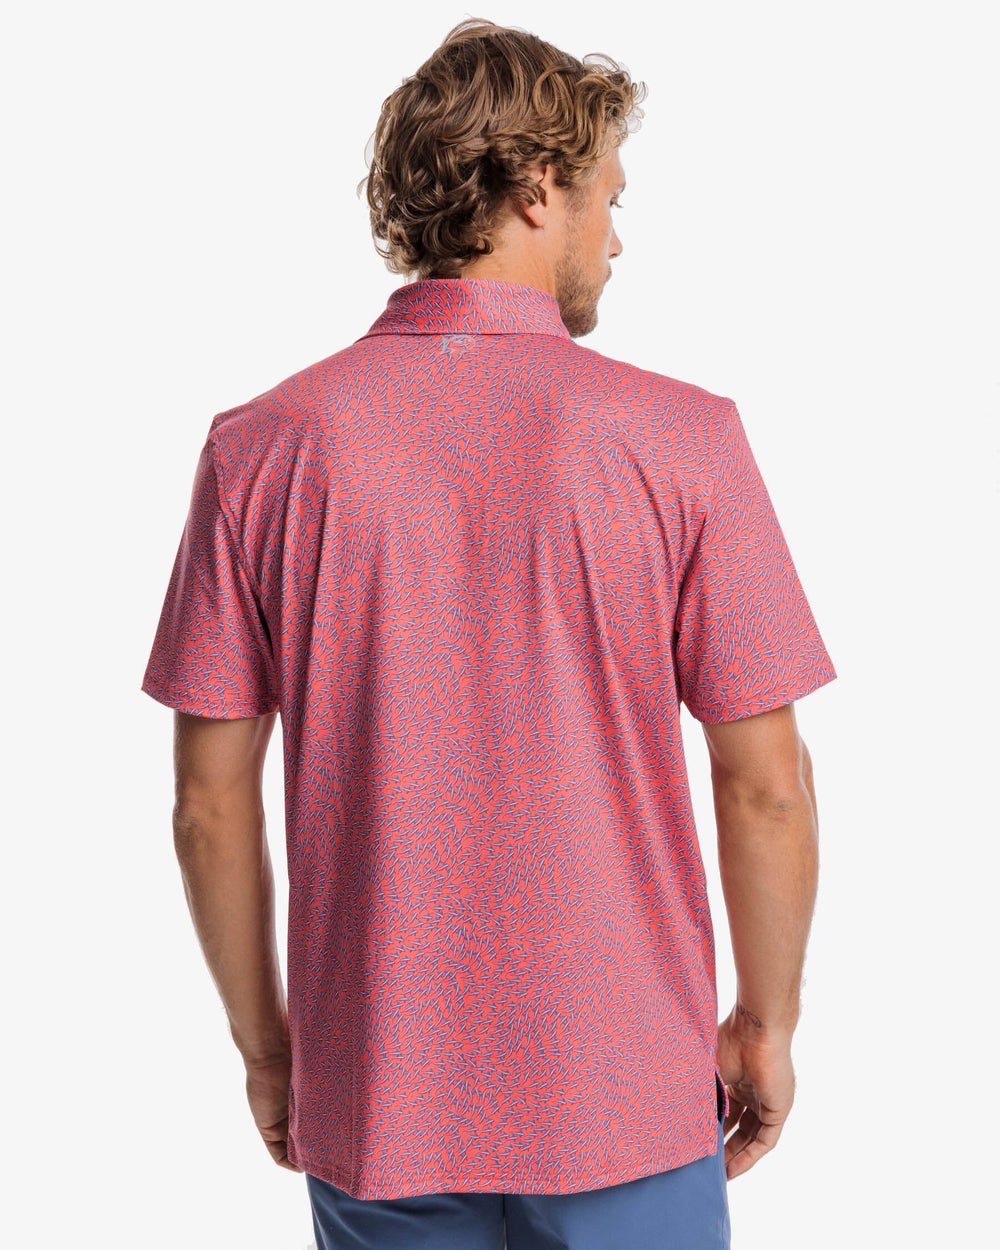 The back view of the Southern Tide Driver Stay in Schools Polo Shirt by Southern Tide - Rosewood Red